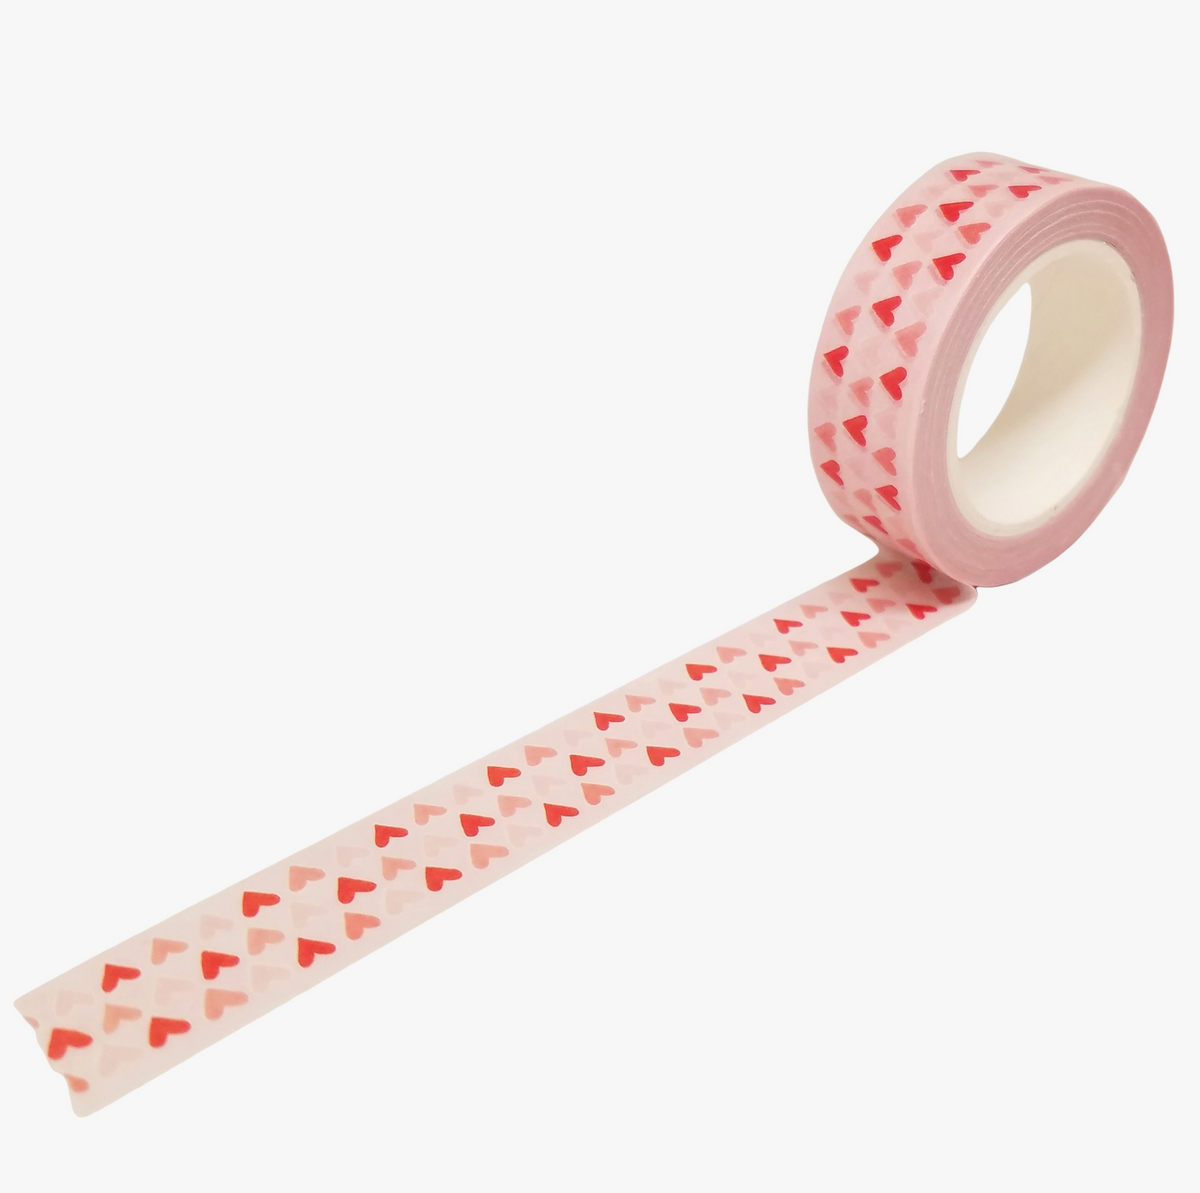 2cm Hula Universe White Washi Tape — The Little Red House